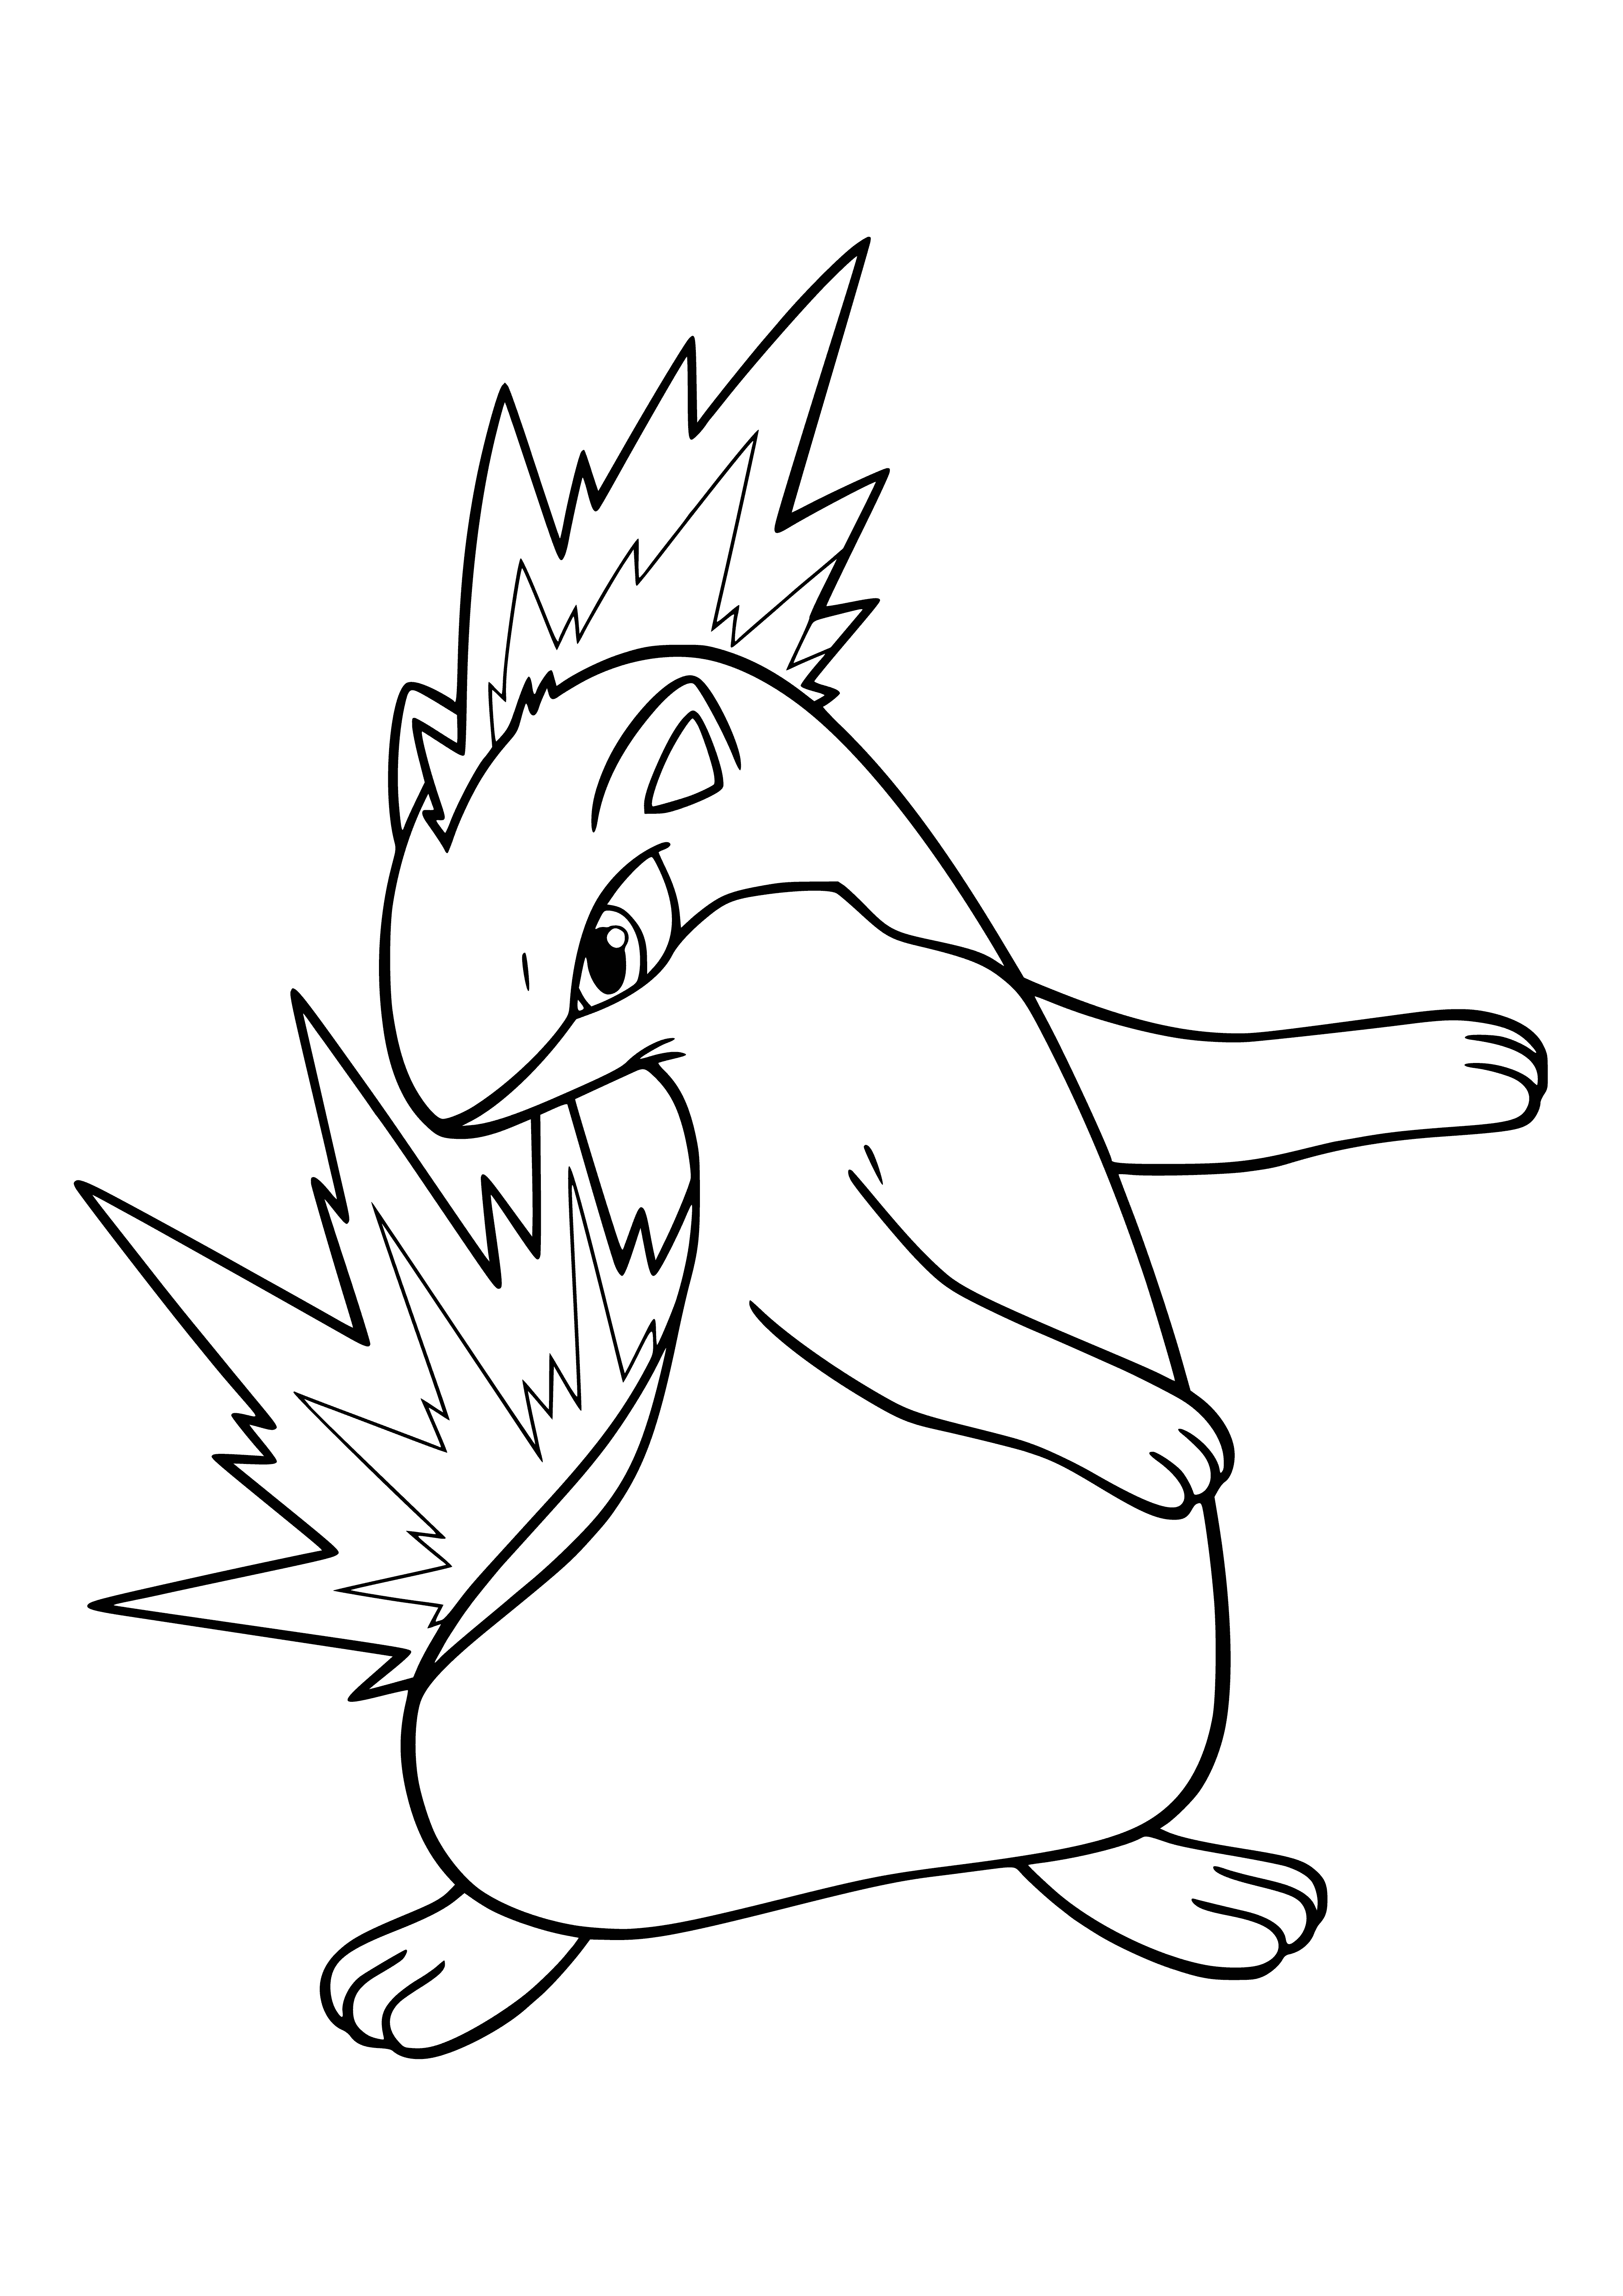 coloring page: Colorful Fire-type Pokemon Quilava evolves from Cyndaquil & into Typhlosion. Orange fur, red spots, red eyes & black rings. Small fangs, tufts & claws. Stubby tail with black tip. #Pokemon #coloring